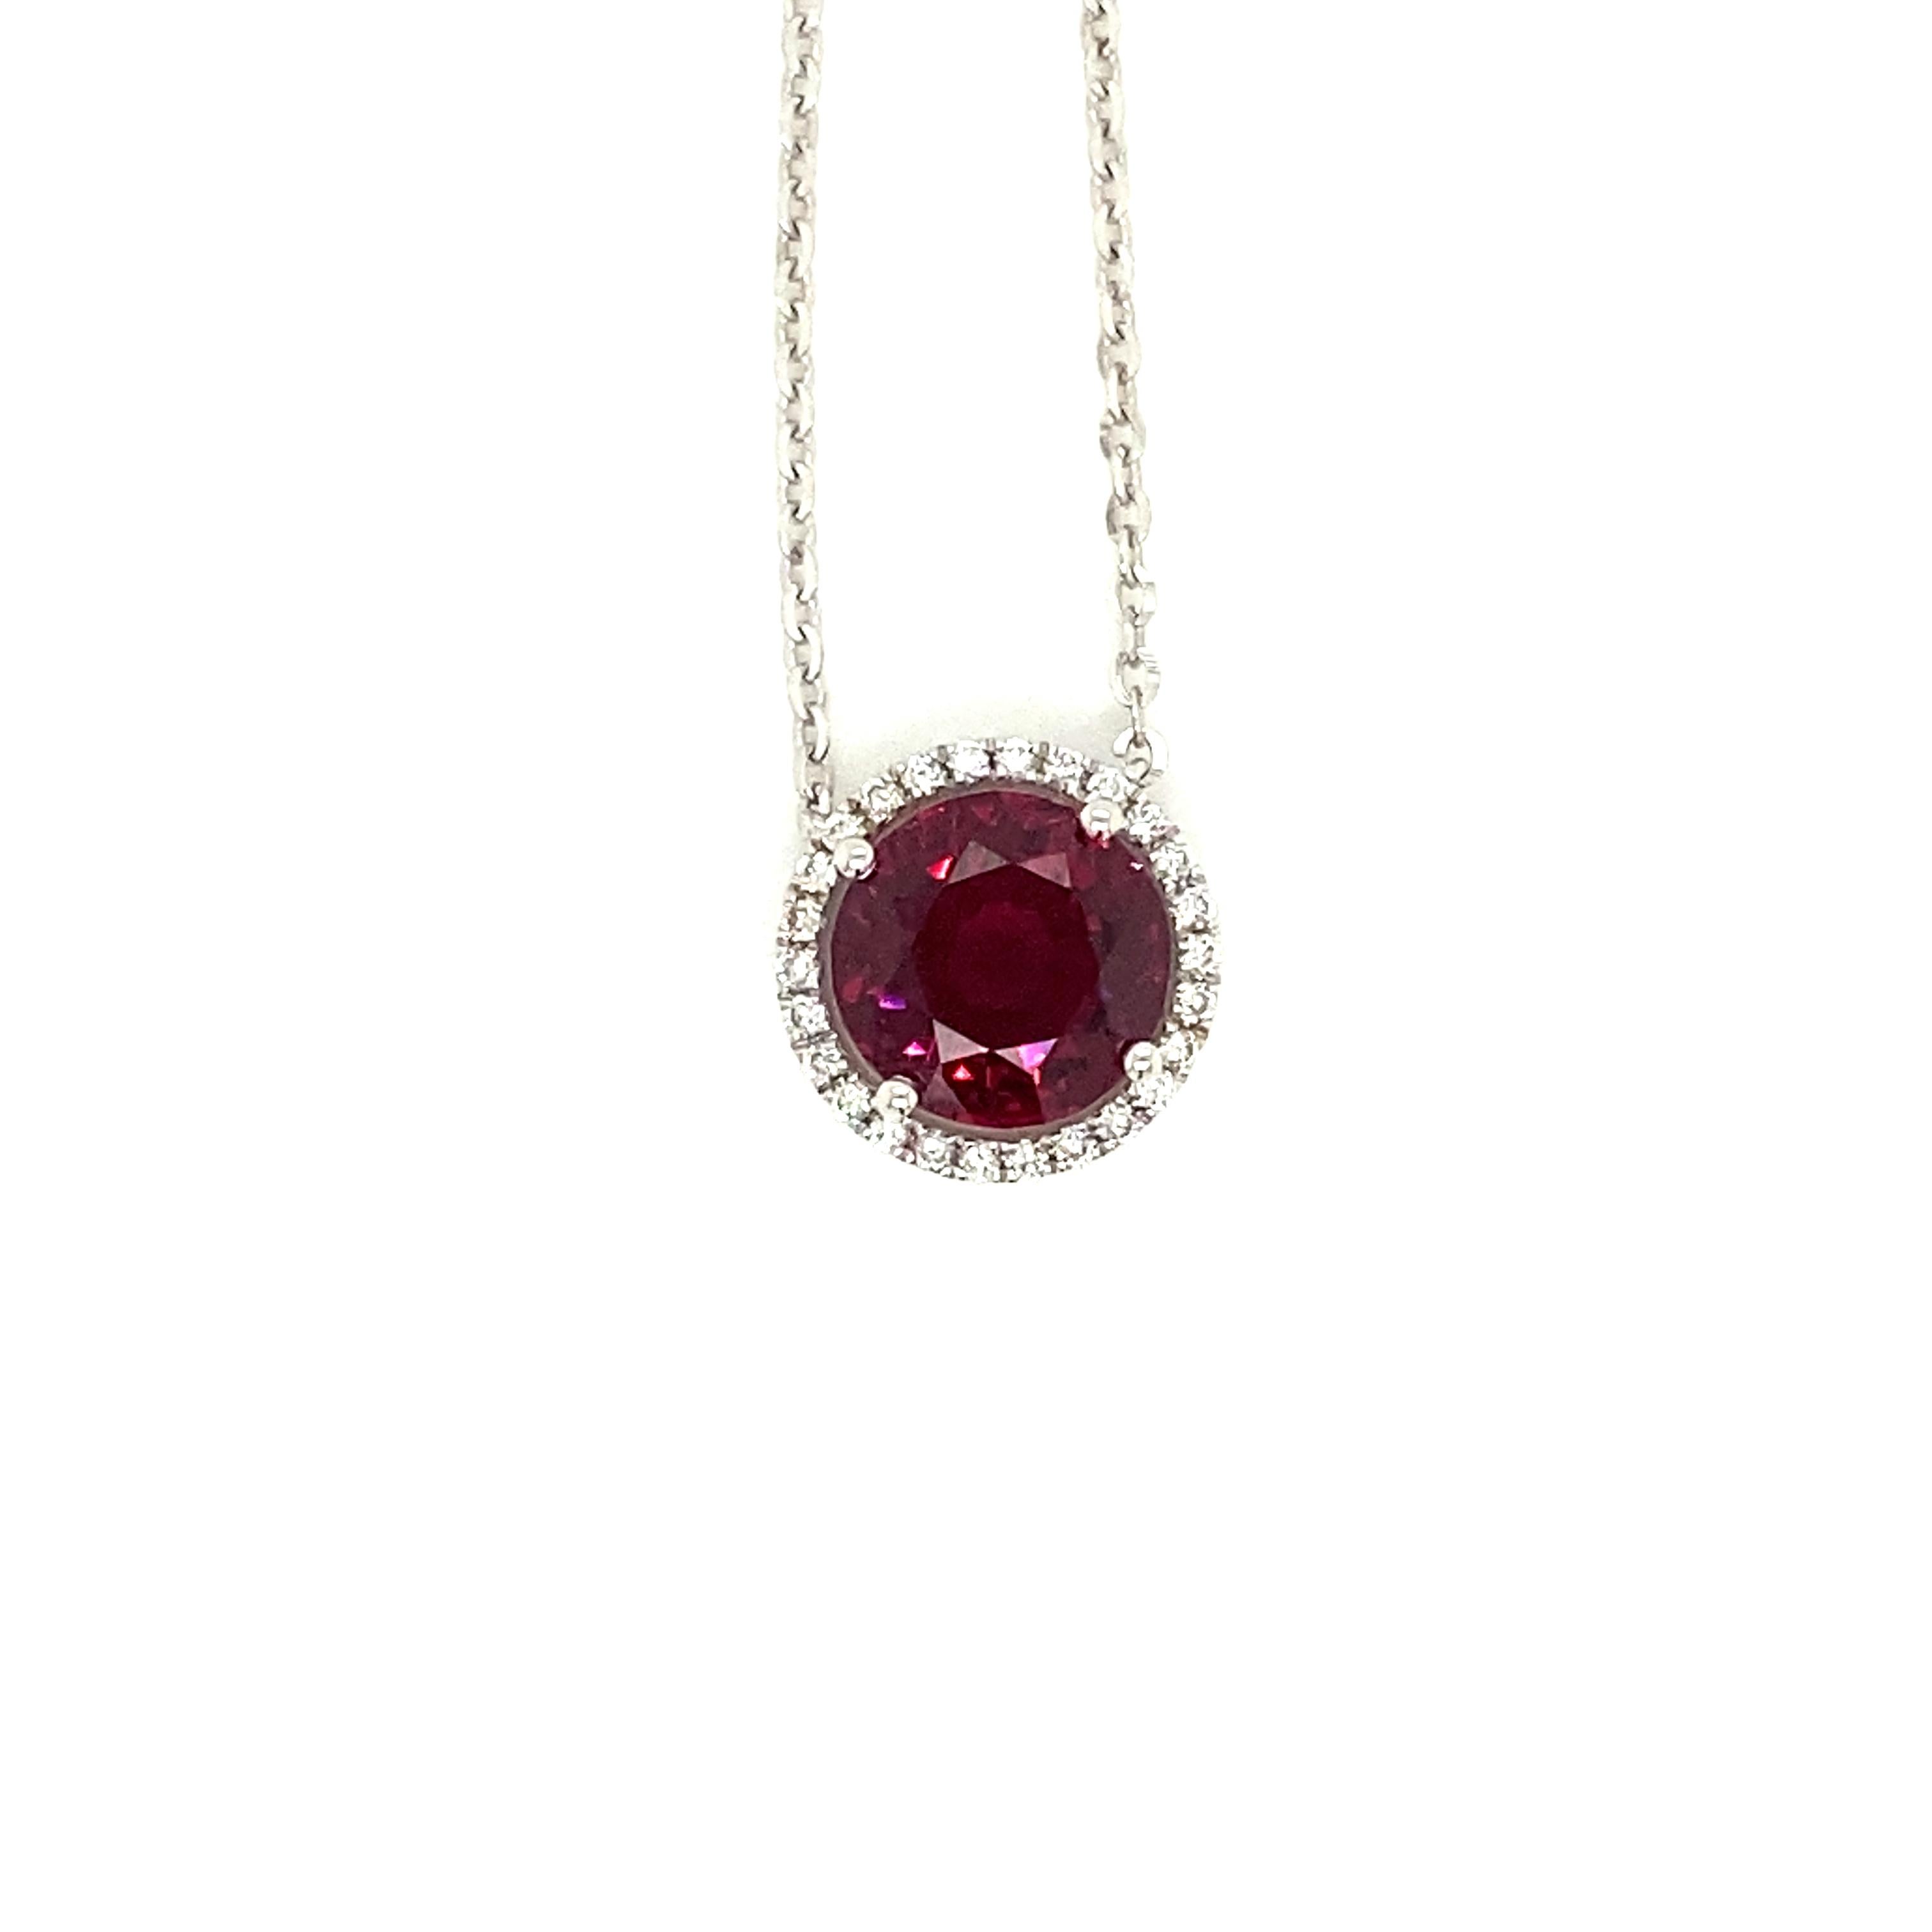 4.14 Carat Round-Cut Vivid Pink-Purple Garnet and White Diamond Pendant Necklace:

A beautiful pendant necklace, it features a 4.14 carat round-cut vivid pink-purple garnet in the centre surrounded by a halo of white round-brilliant cut diamonds